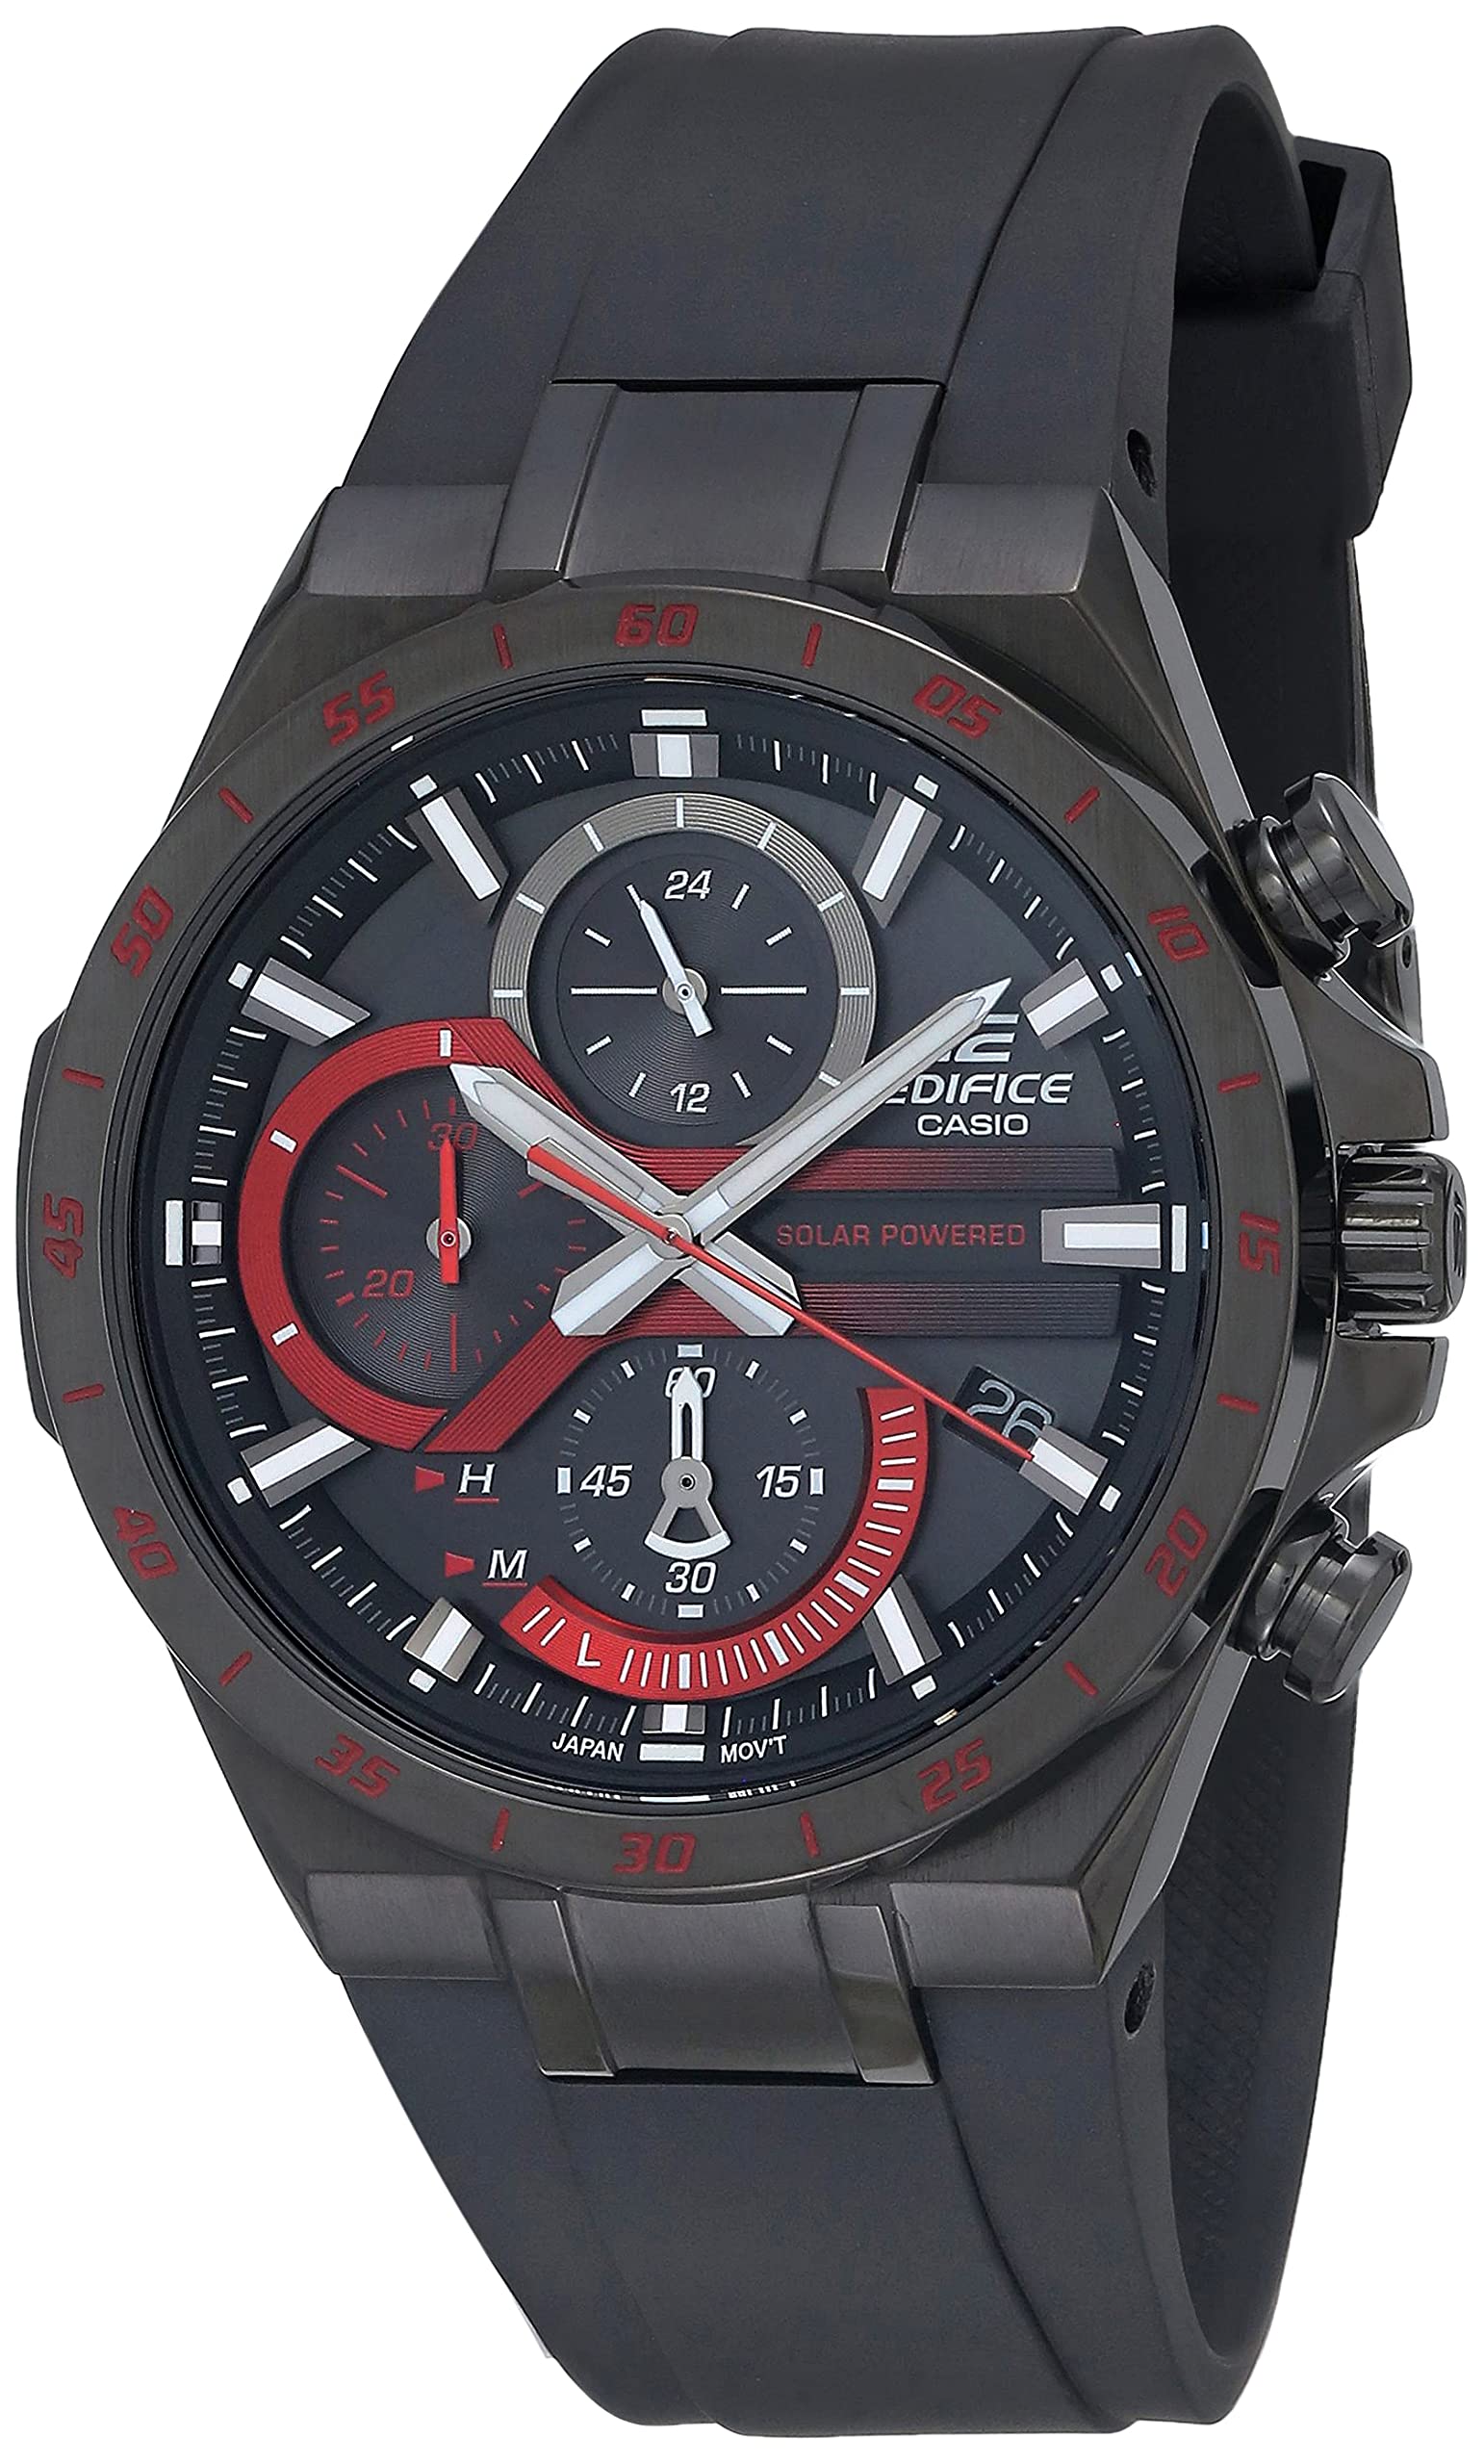 Casio Men's Edifice Stainless Steel Quartz Watch with Resin Strap, Black, 28.5 (Model: EQS-920PB-1AVCR) for $100